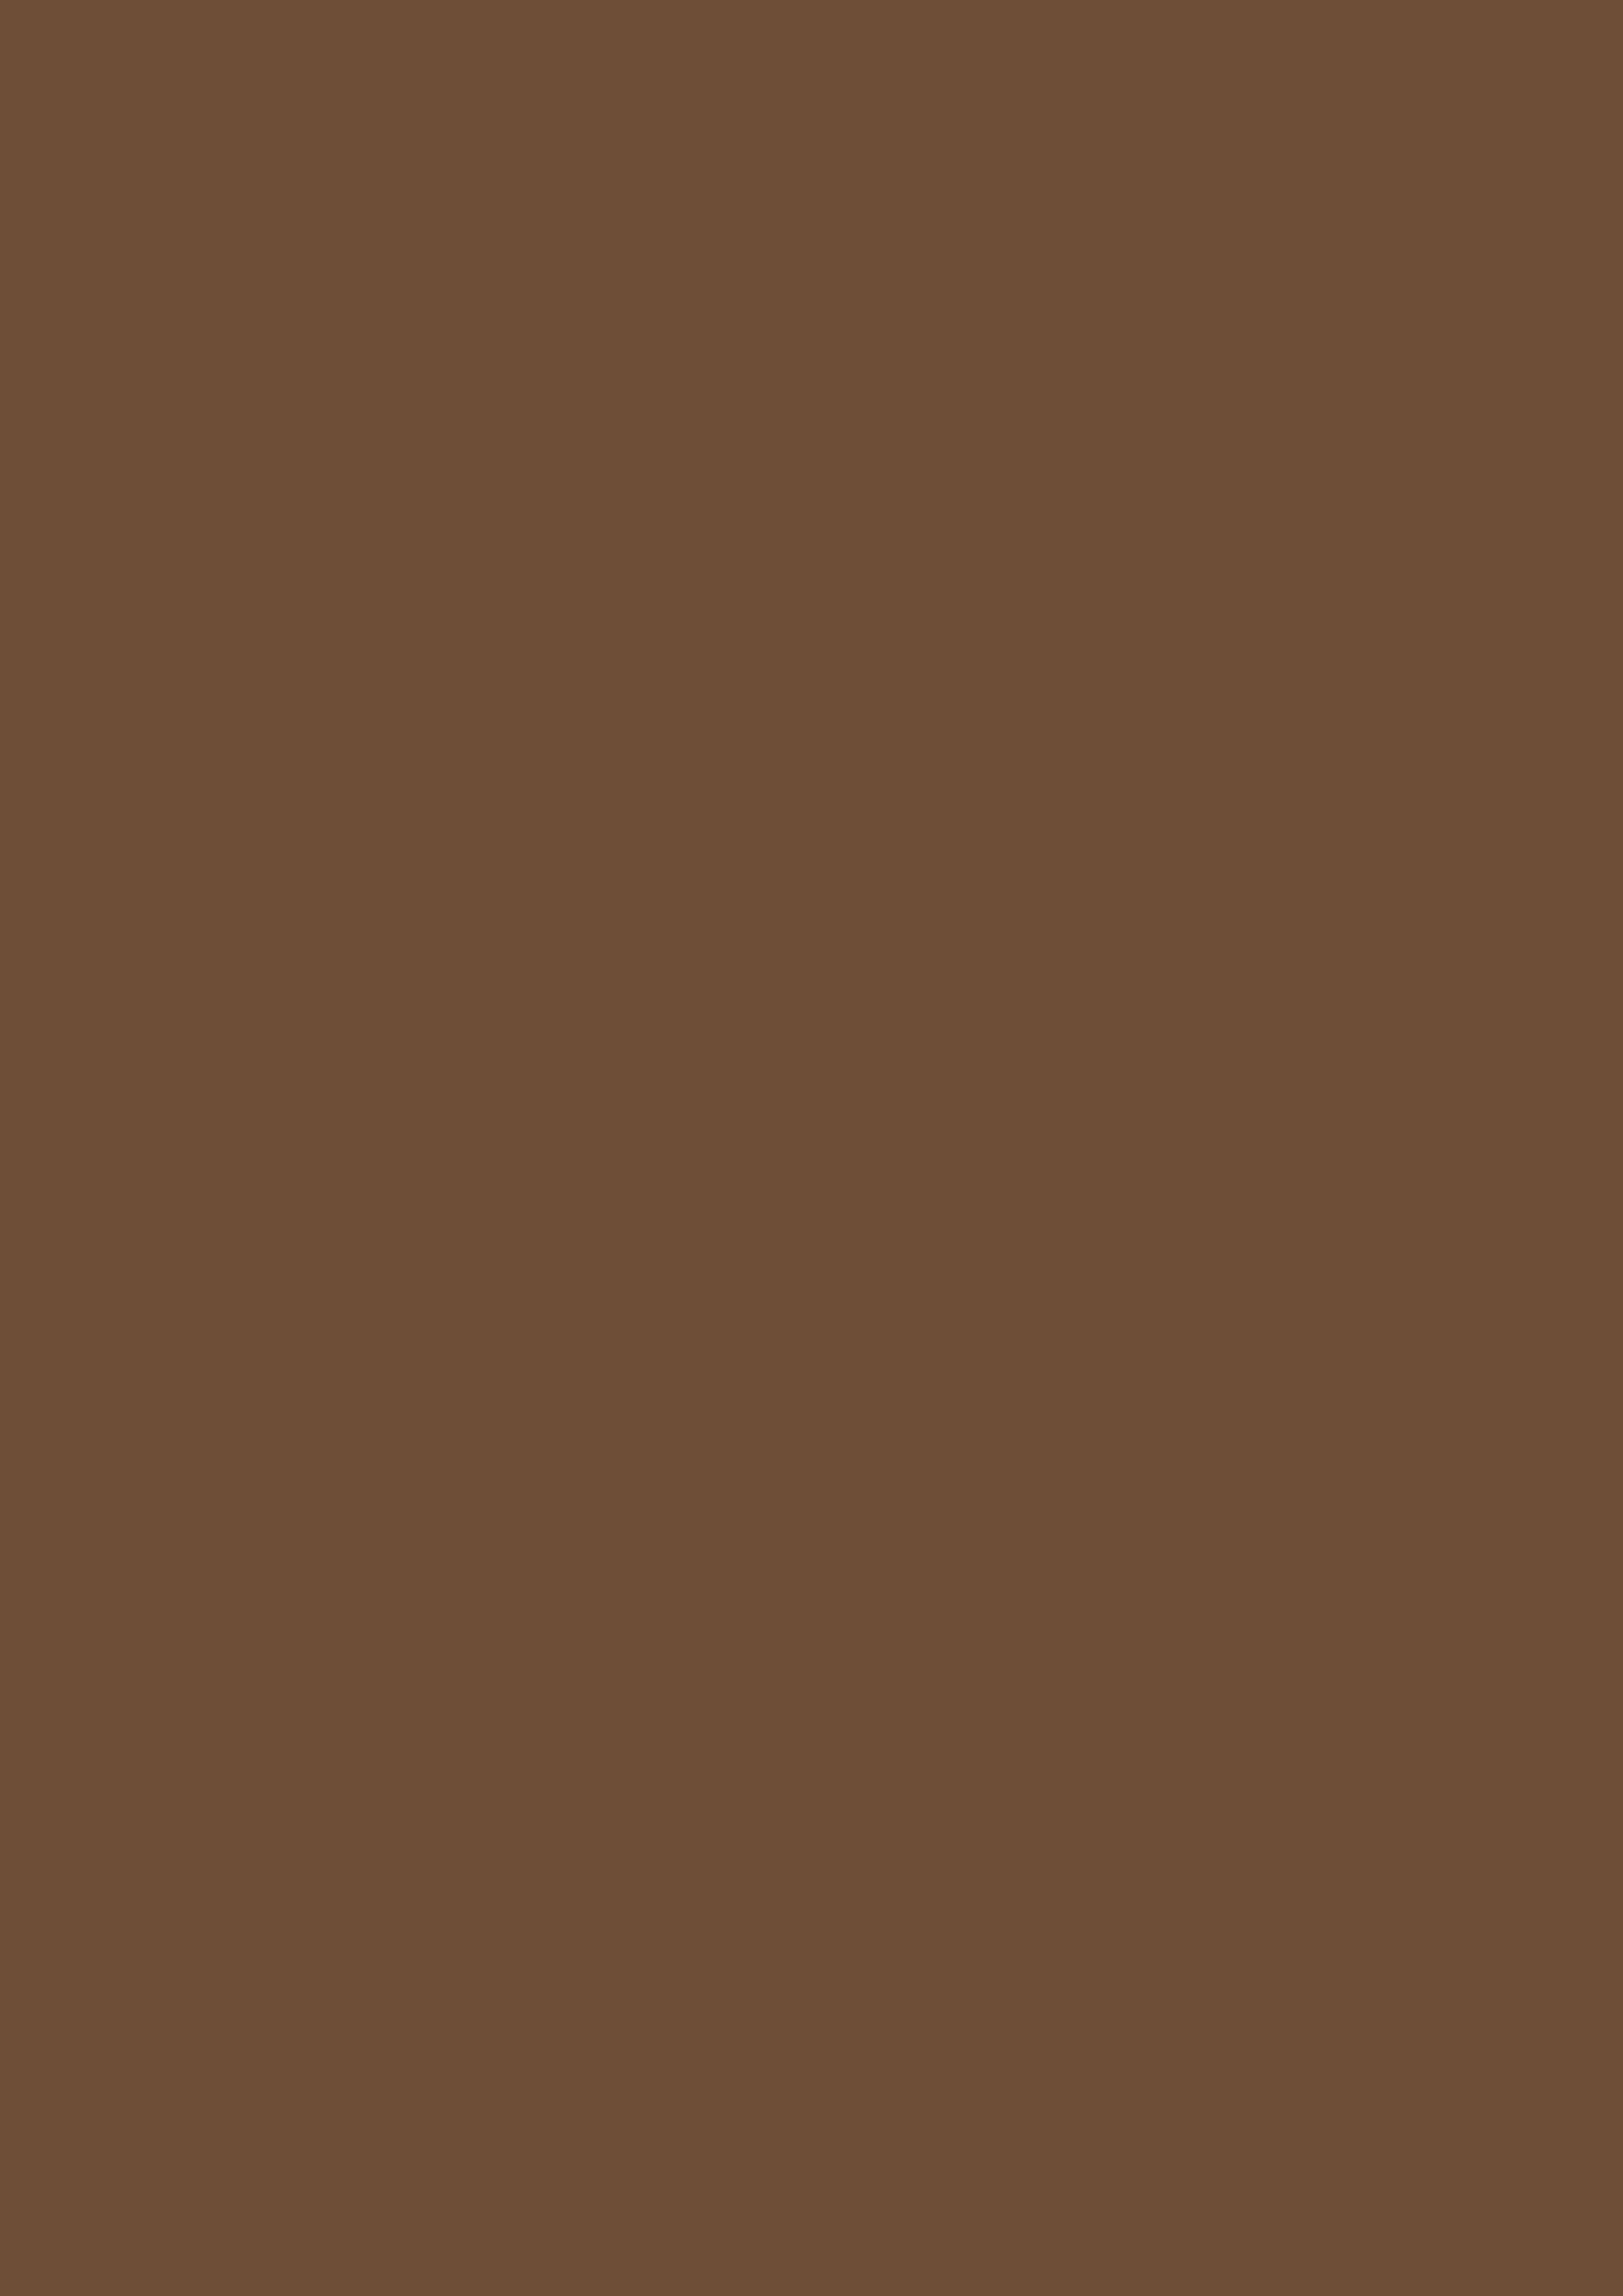 2480x3508 Tuscan Brown Solid Color Background